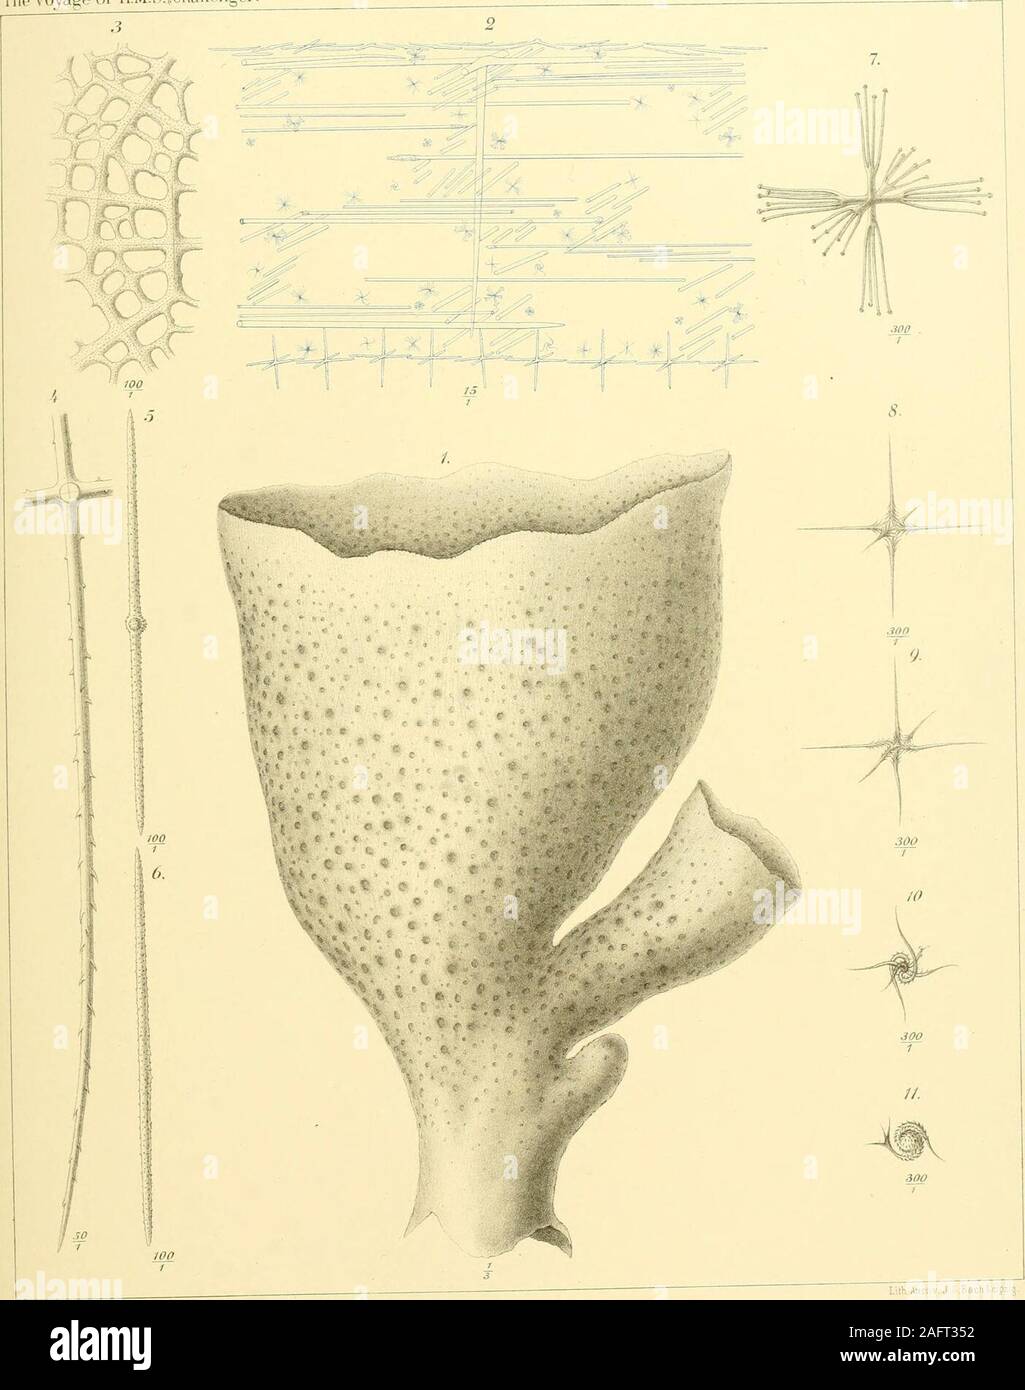 . Report on the scientific results of the voyage of H.M.S. Challenger during the years 1873-76 : under the command of Captain George S. Nares, R.N., F.R.S. and Captain Frank Turle Thomson, R.N.. XIV. PLATE LXIV. PAGE Ehabdocalyptus mollis, F. E. S., . . 155 Fig. 1. A diied specimen; one-thiid natural size. Fig. 2. Spicules of a transverse section of the wall near the free superior margin,in their natural arrangement; x 15 Fio. 3. Plain network of the skeleton in the basal surface, in contact with thesupporting base; x 100. Fig. 4. Part of a large hypodermal pentact, with echinated rays ; x 50. Stock Photo